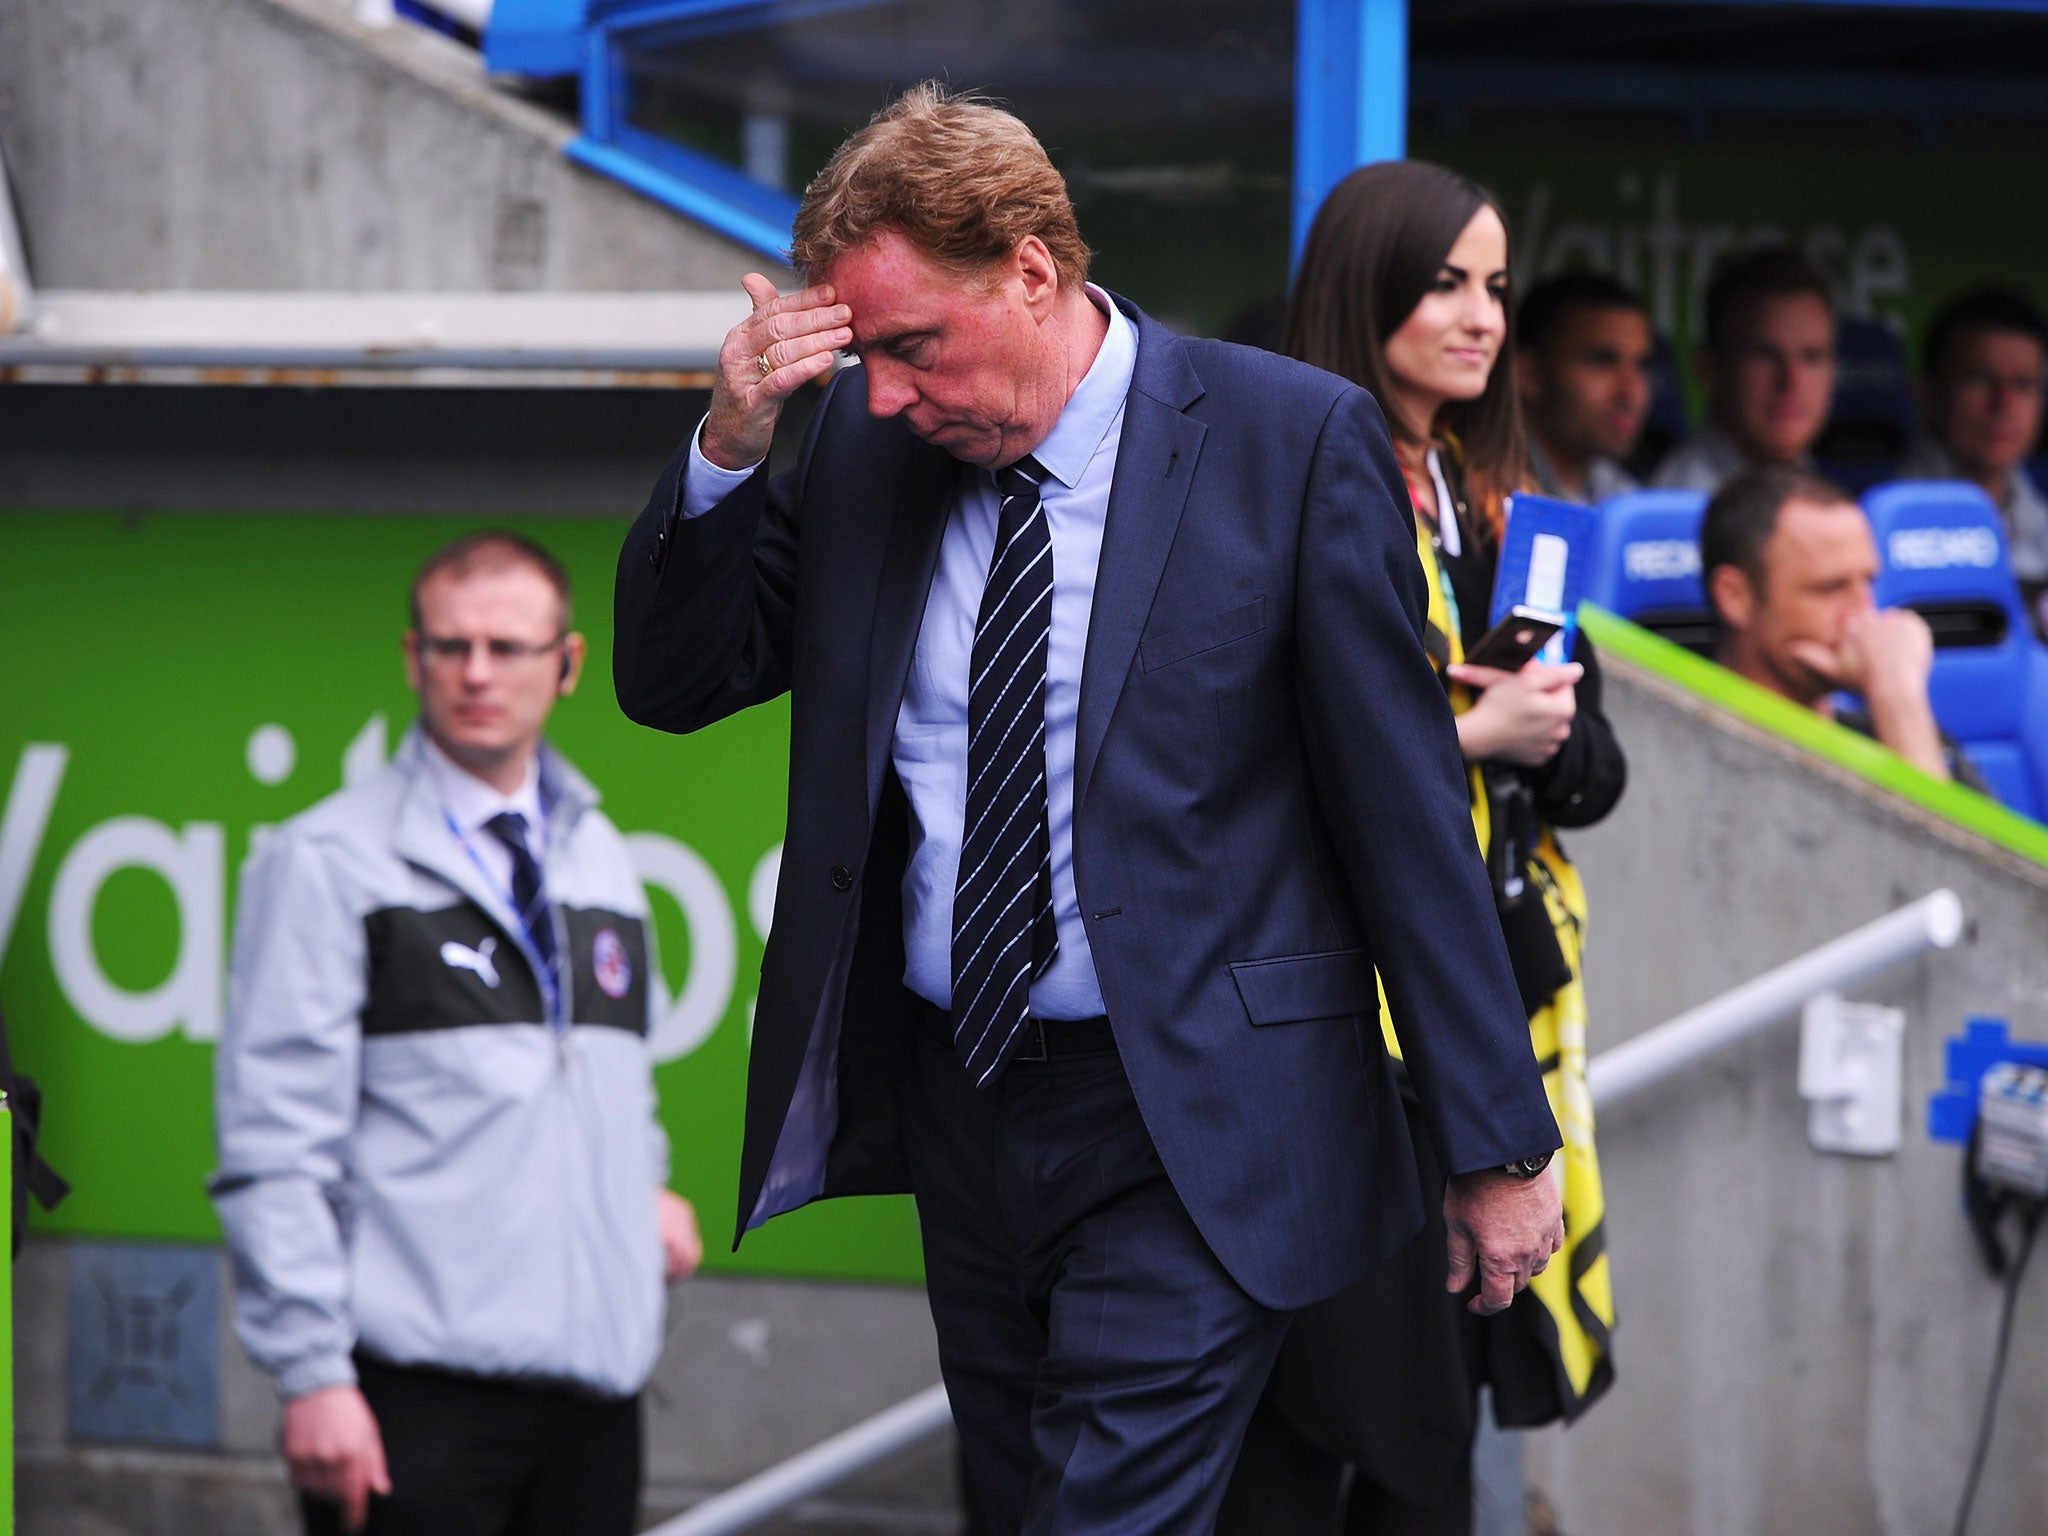 Harry Redknapp, manager of Queens Park Rangers wipes his brow prior to the Barclays Premier League match between Reading and Queens Park Rangers at the Madejski Stadium on April 28, 2013 in Reading, England.